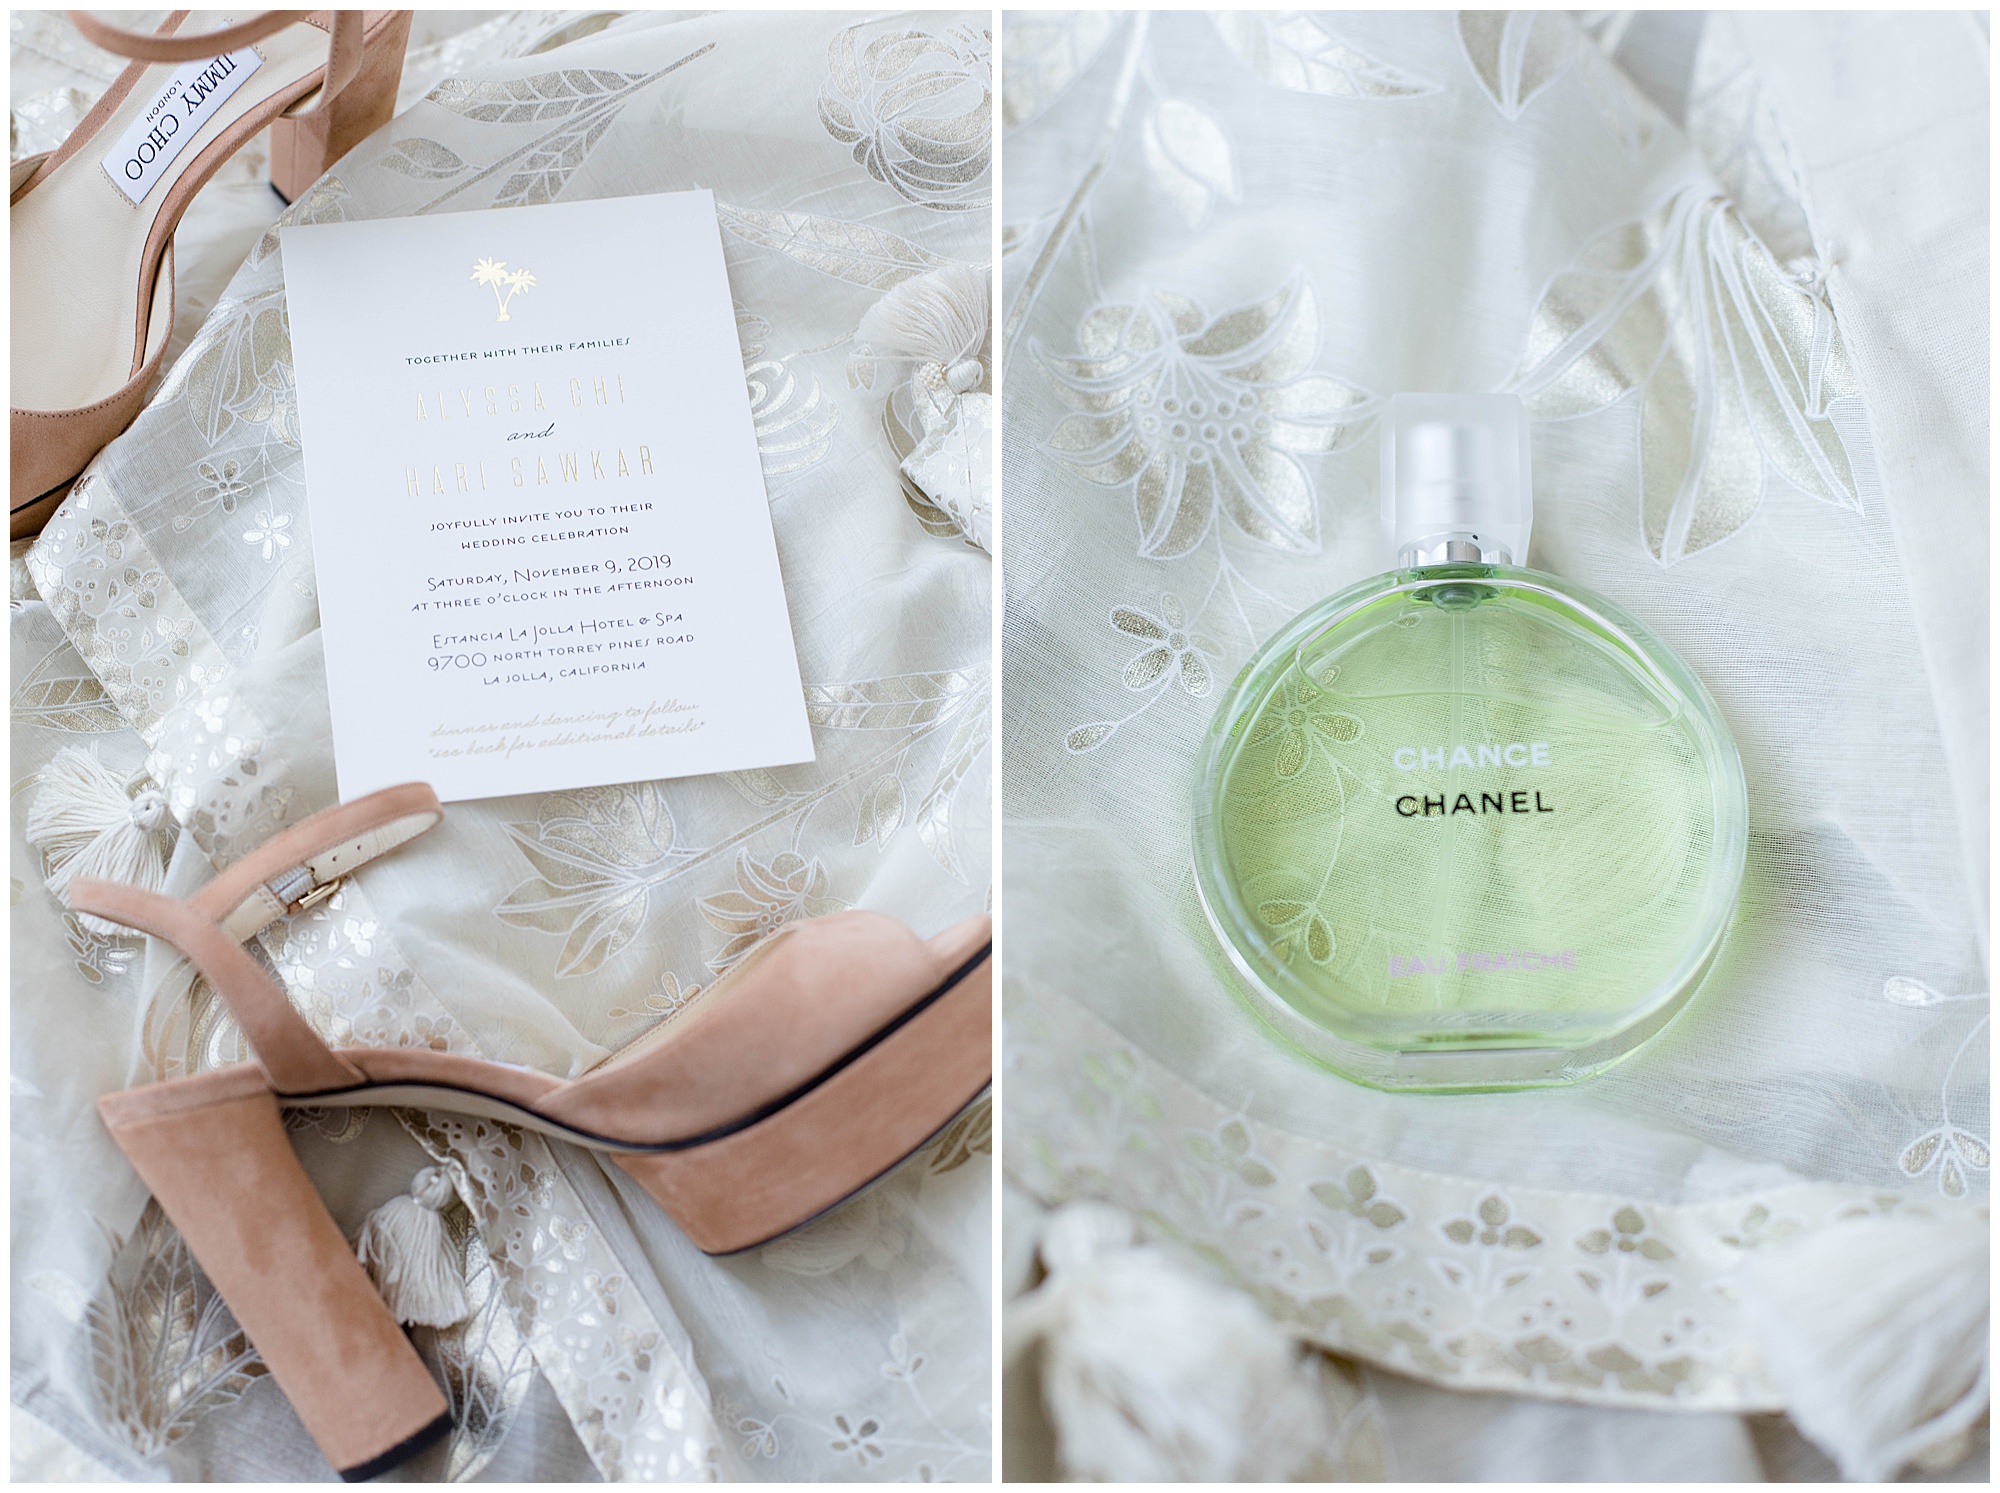 Bridal details included chanel perfume